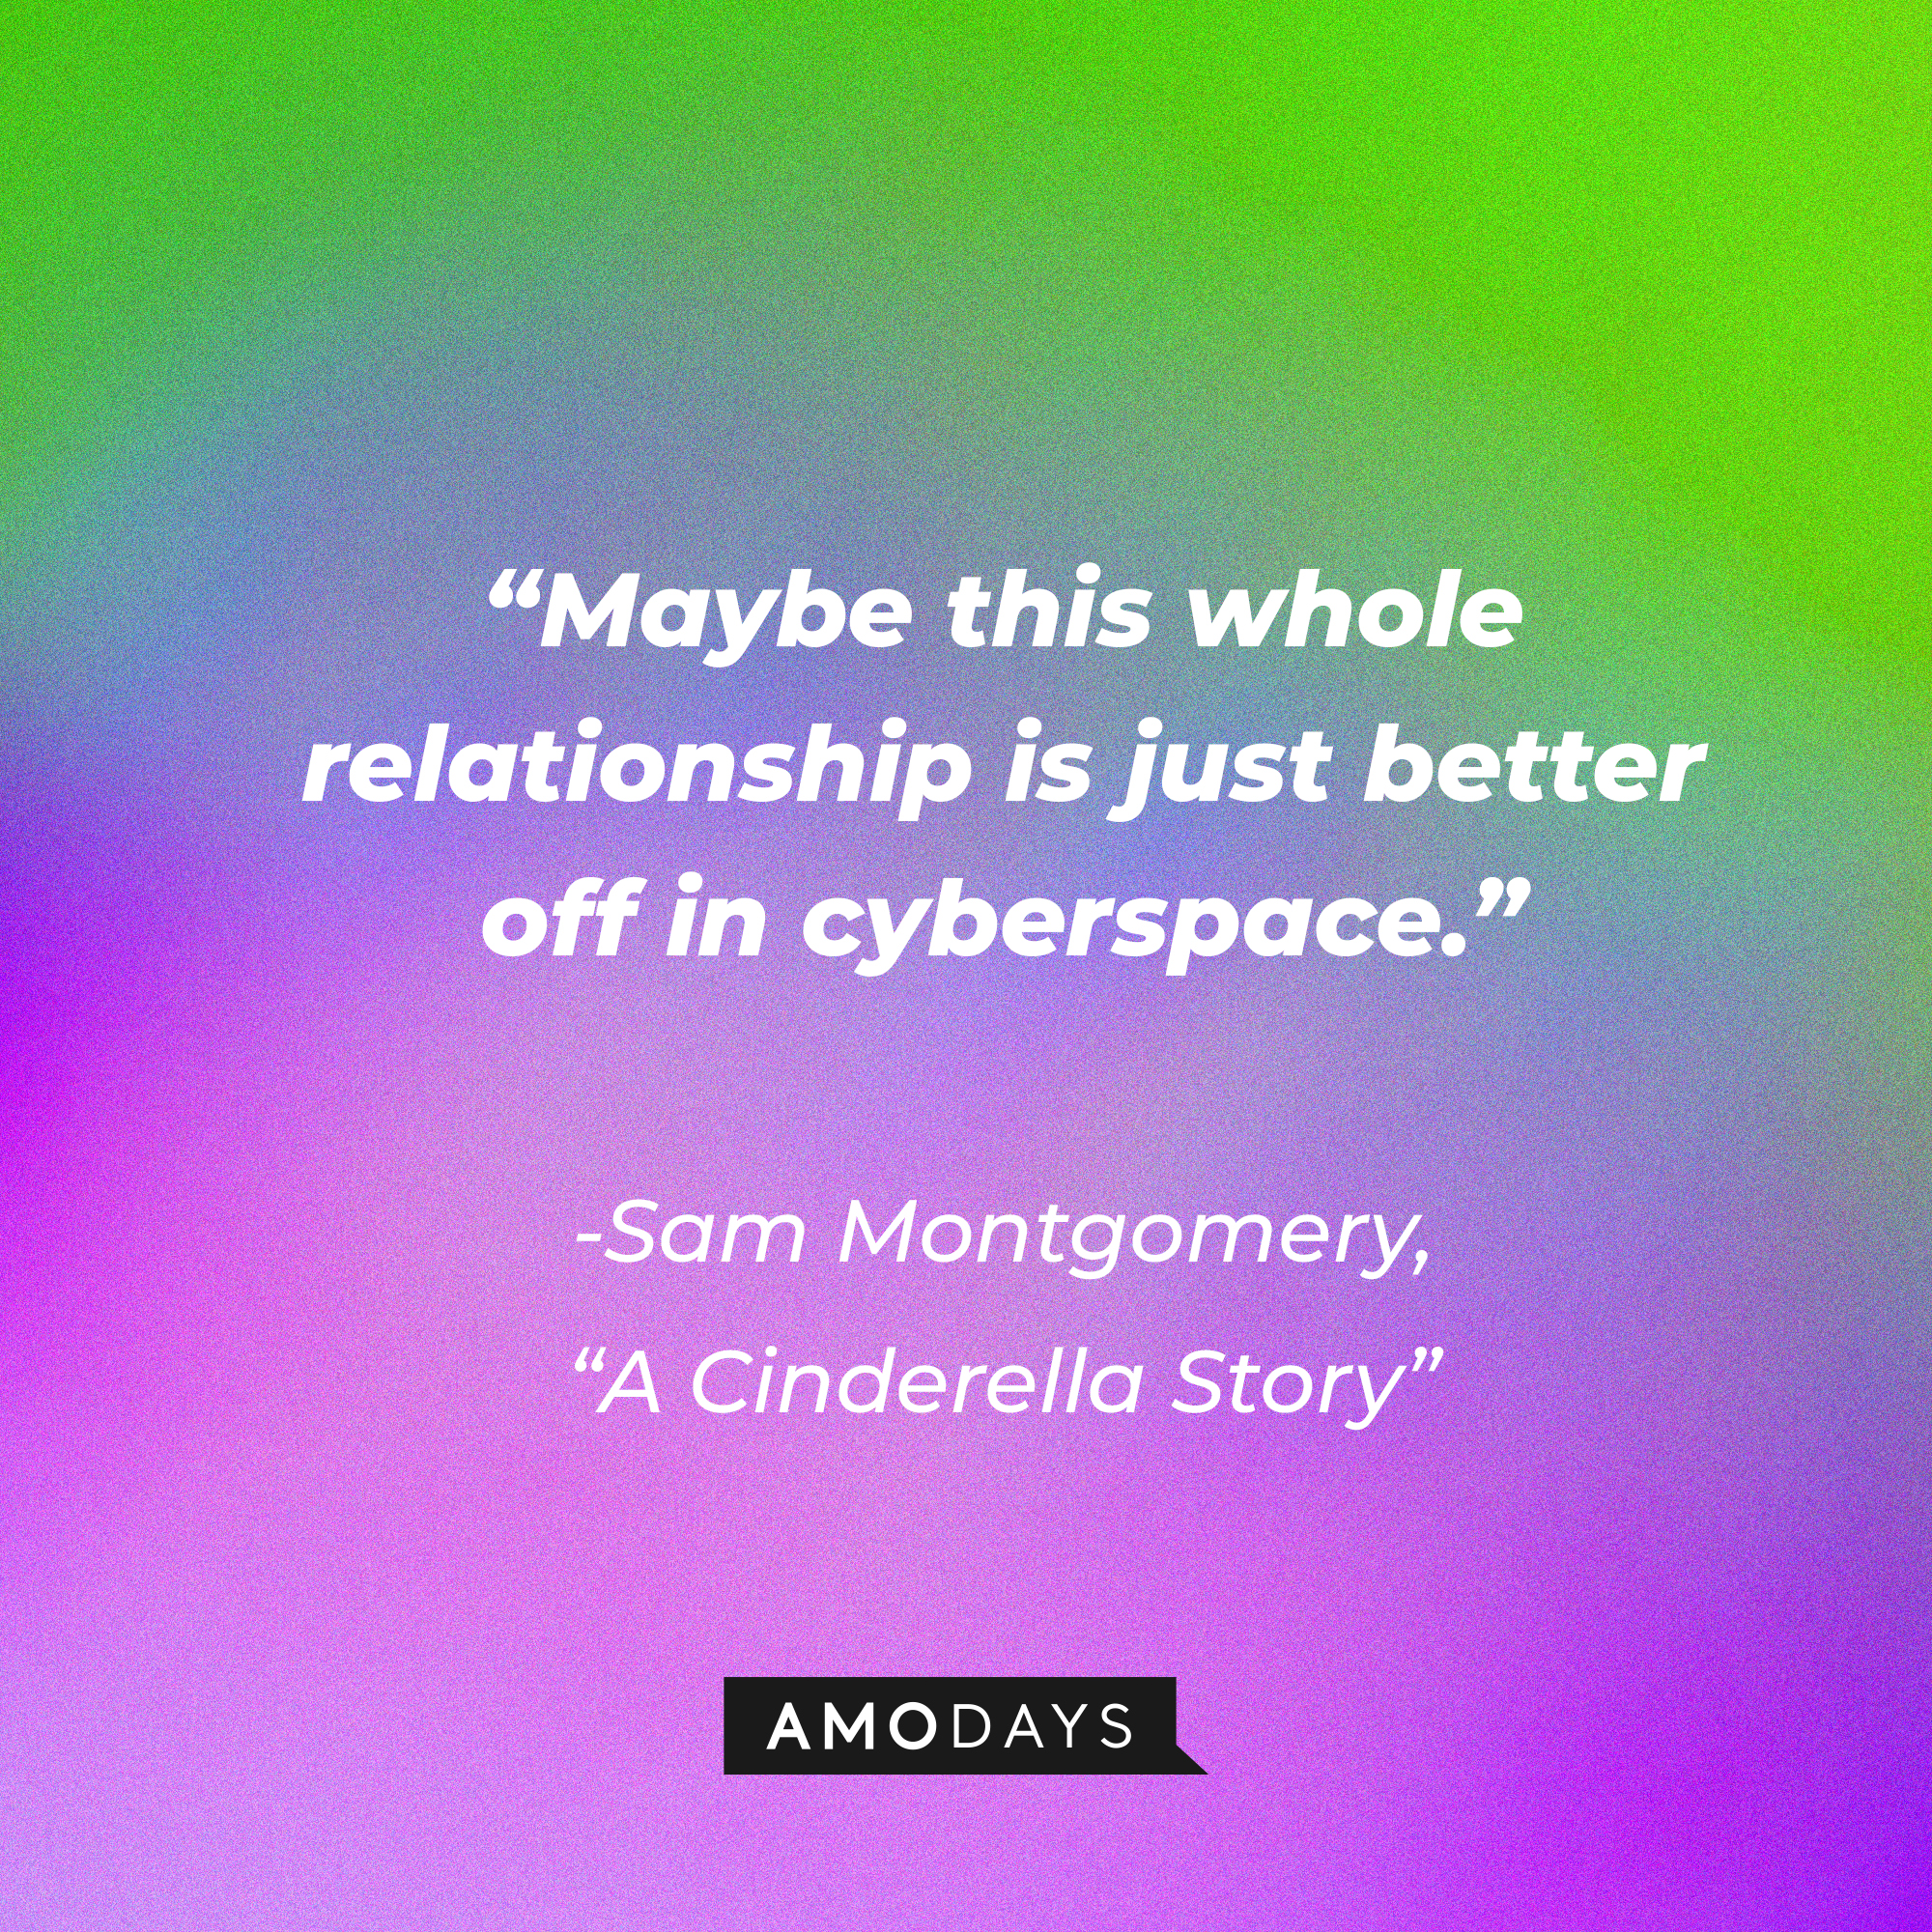 Sam Montgomery's quote from "A Cinderella Story:" “Maybe this whole relationship is just better off in cyberspace.”  | Source: Youtube.com/warnerbrosentertainment